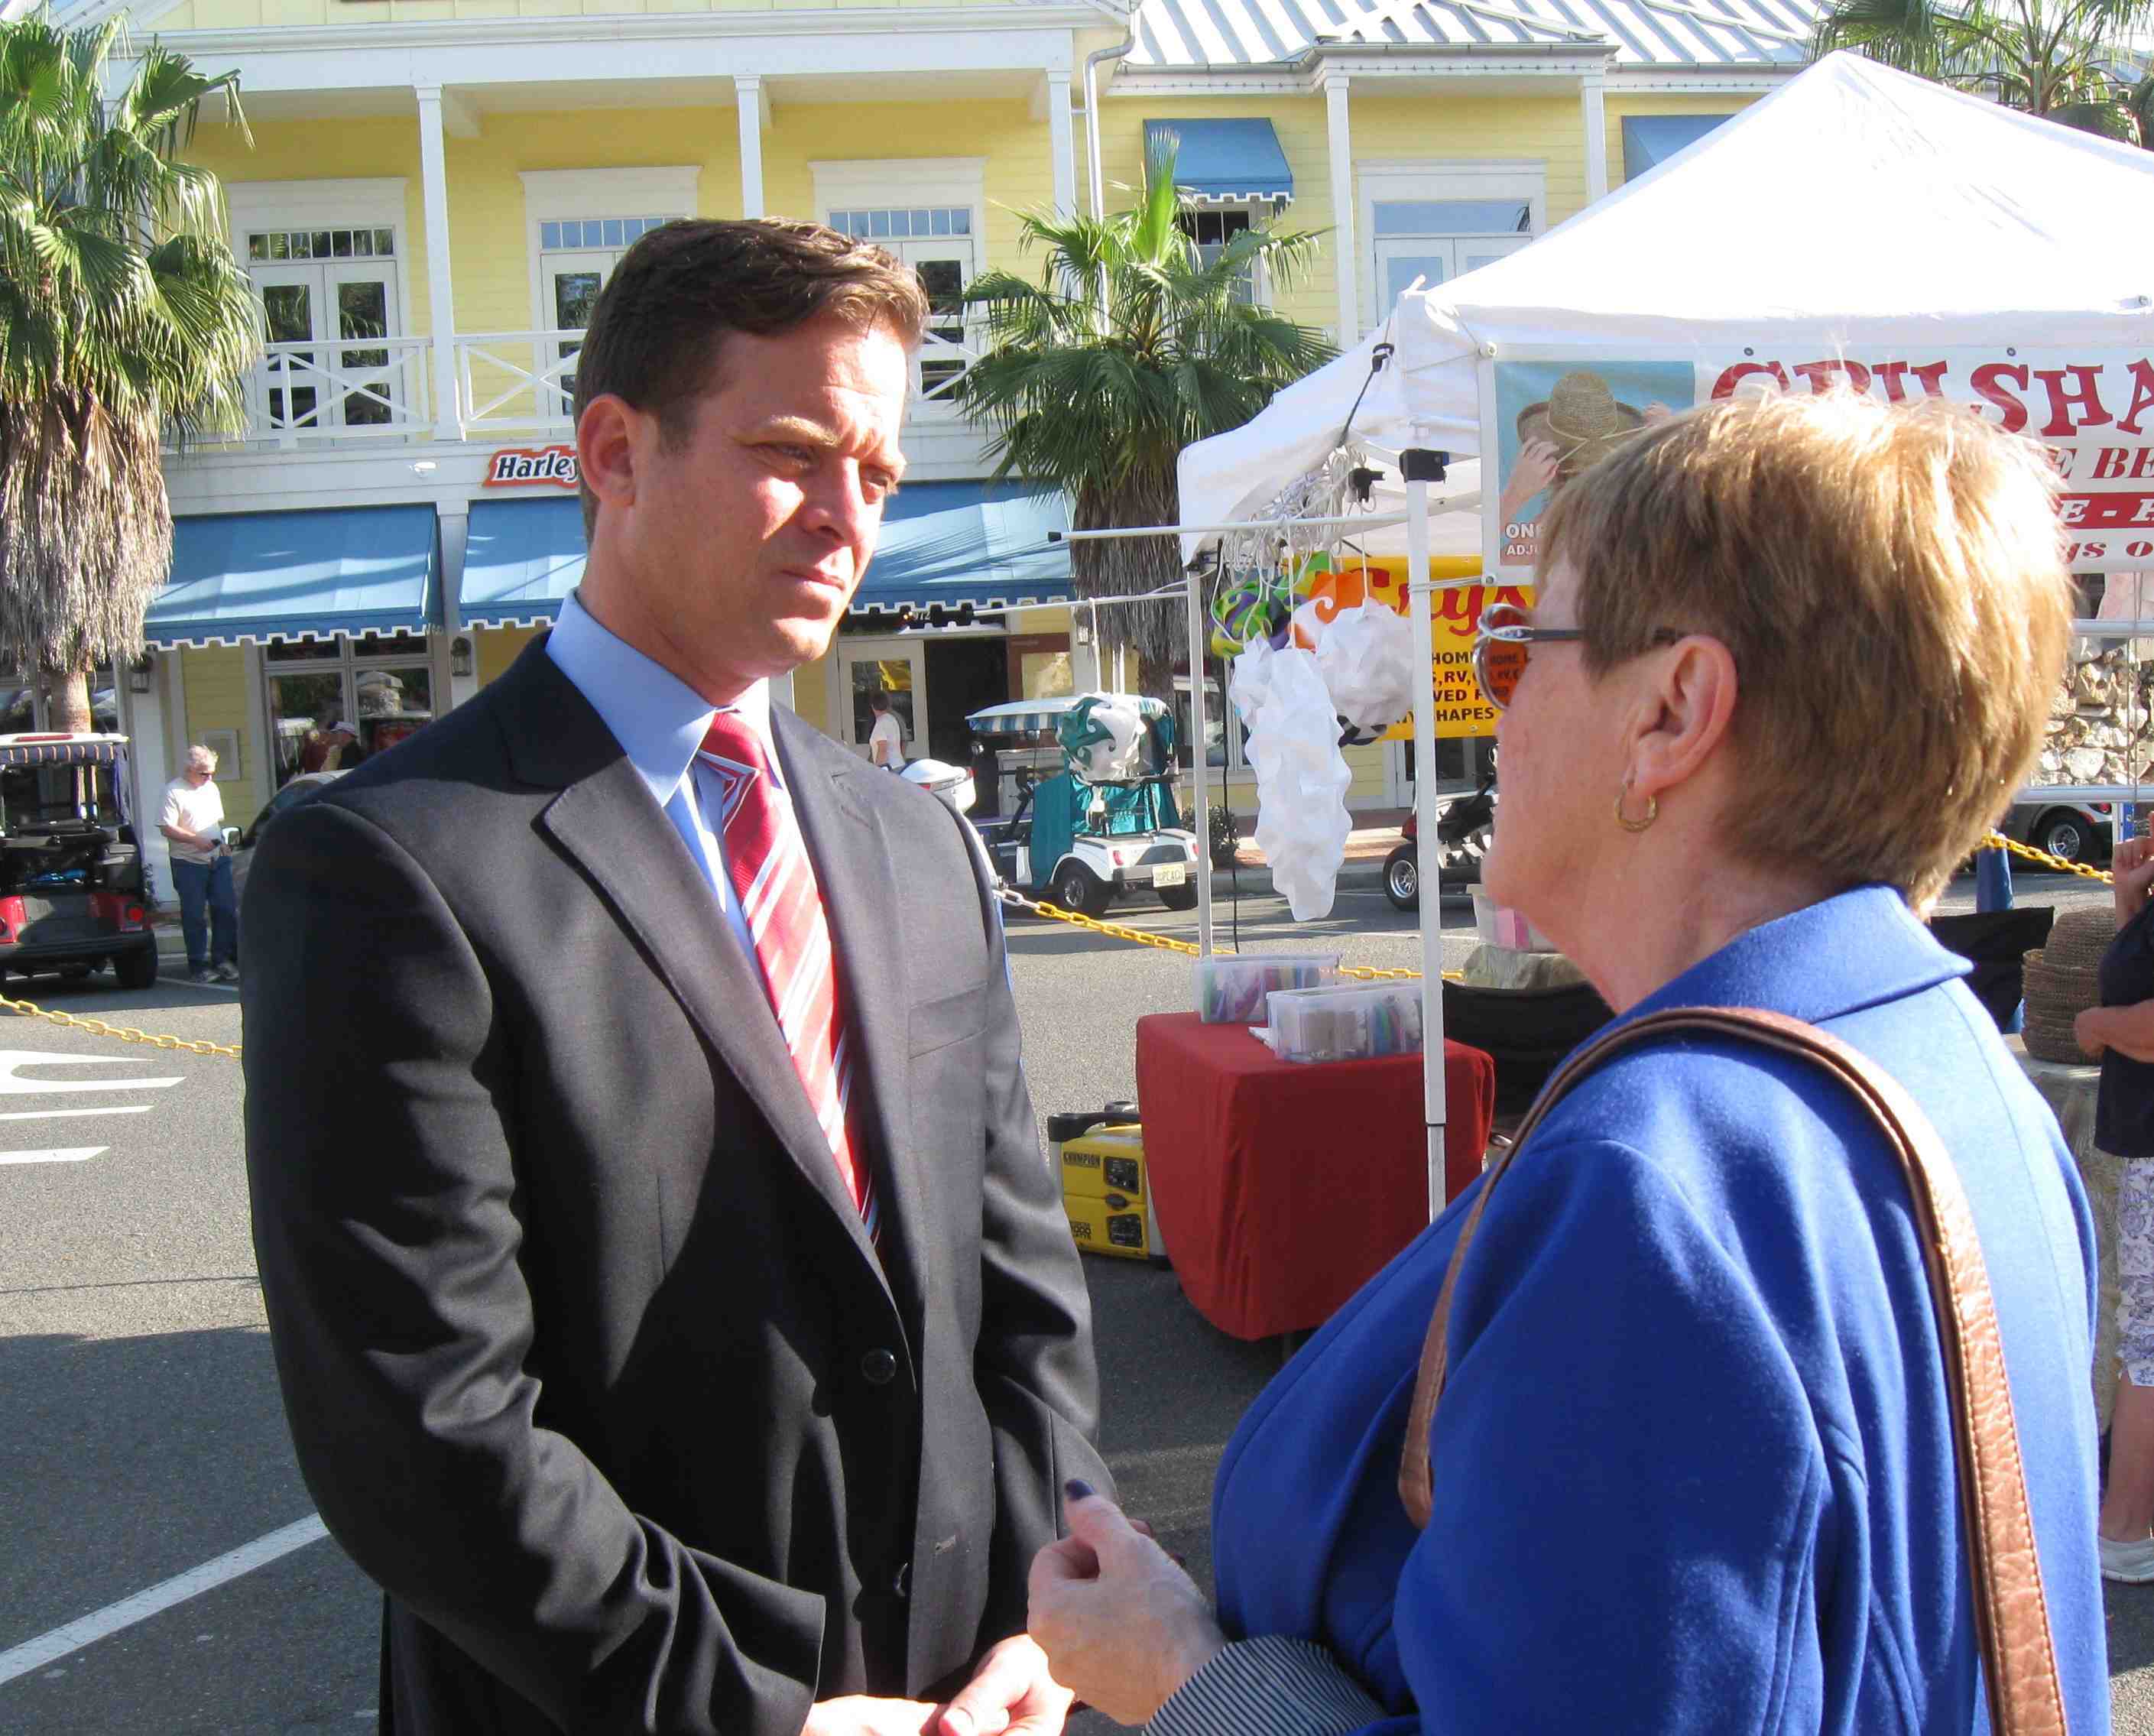 Marlene O’Toole makes endorsement in race to replace U.S. Sen. Marco Rubio